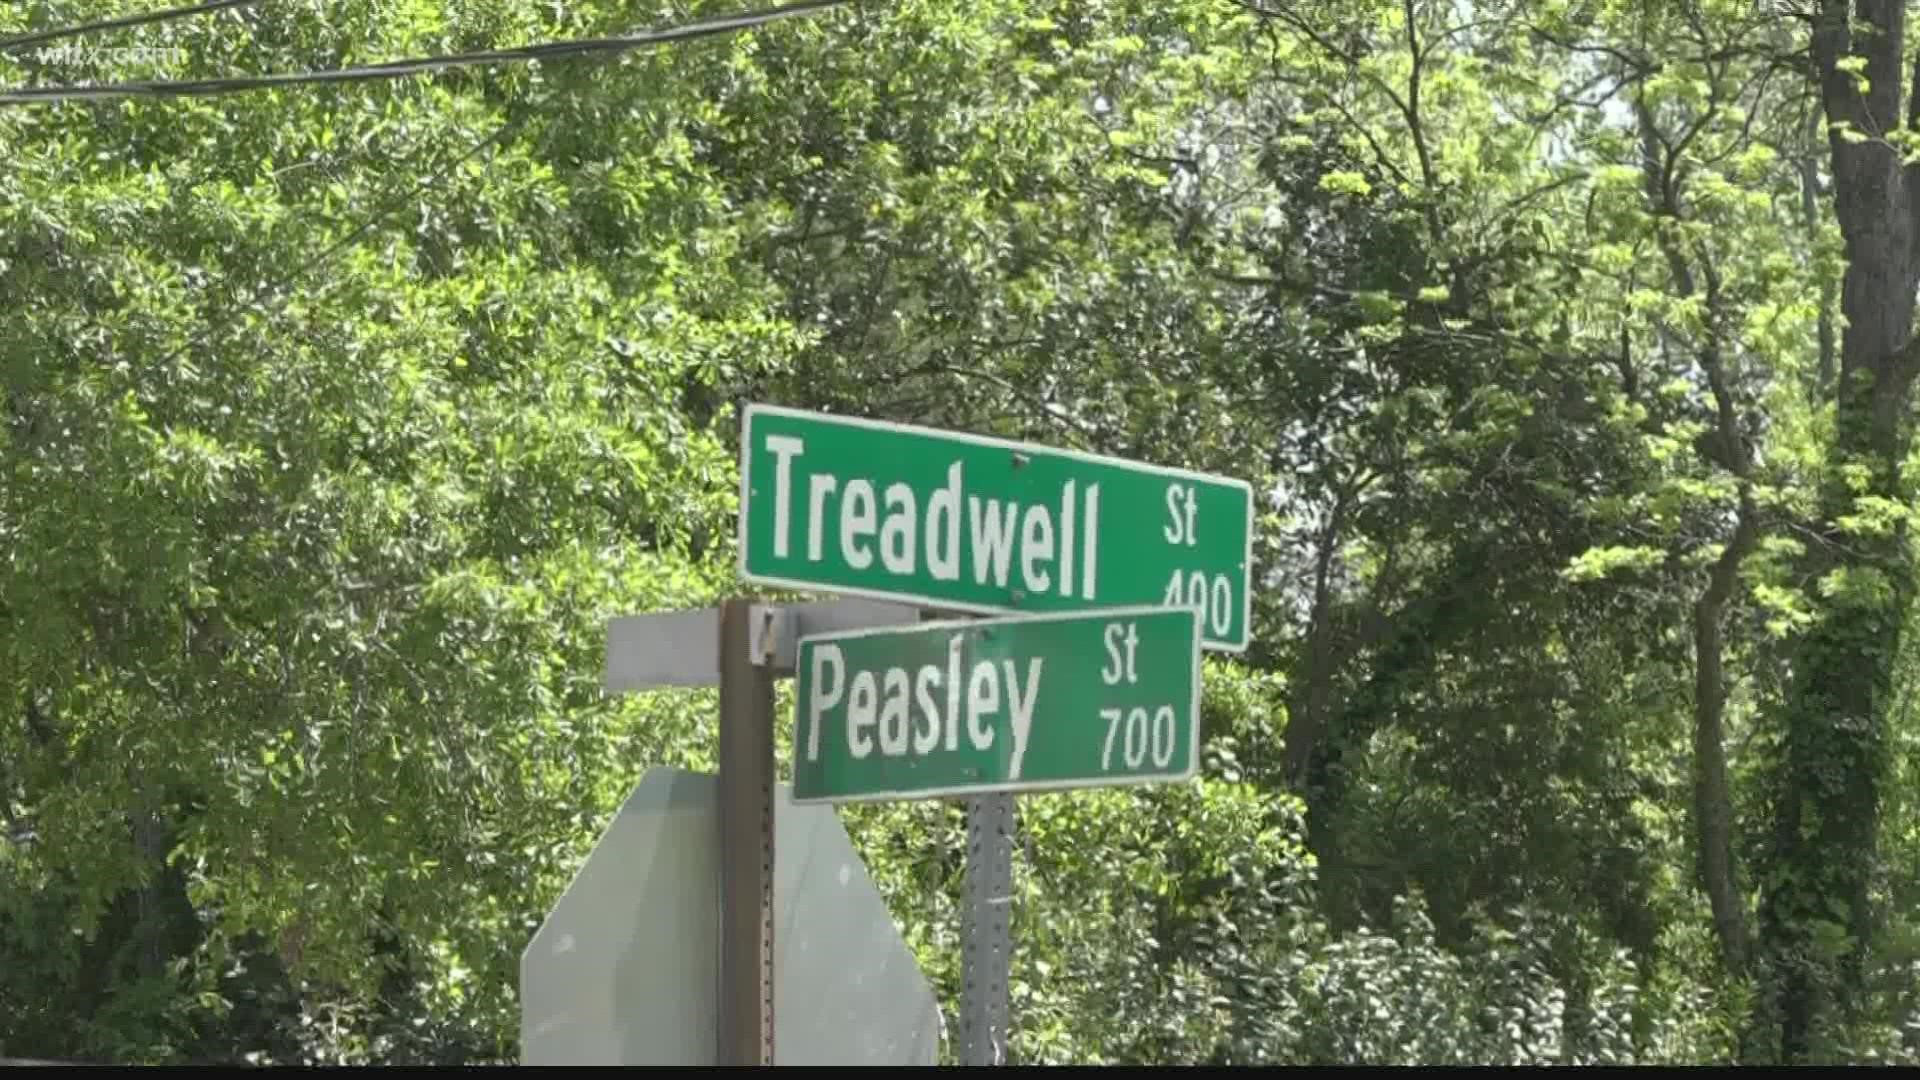 One person was wounded when shots were fired in the 400 block of Treadwell Street in Orangeburg on Wednesday.